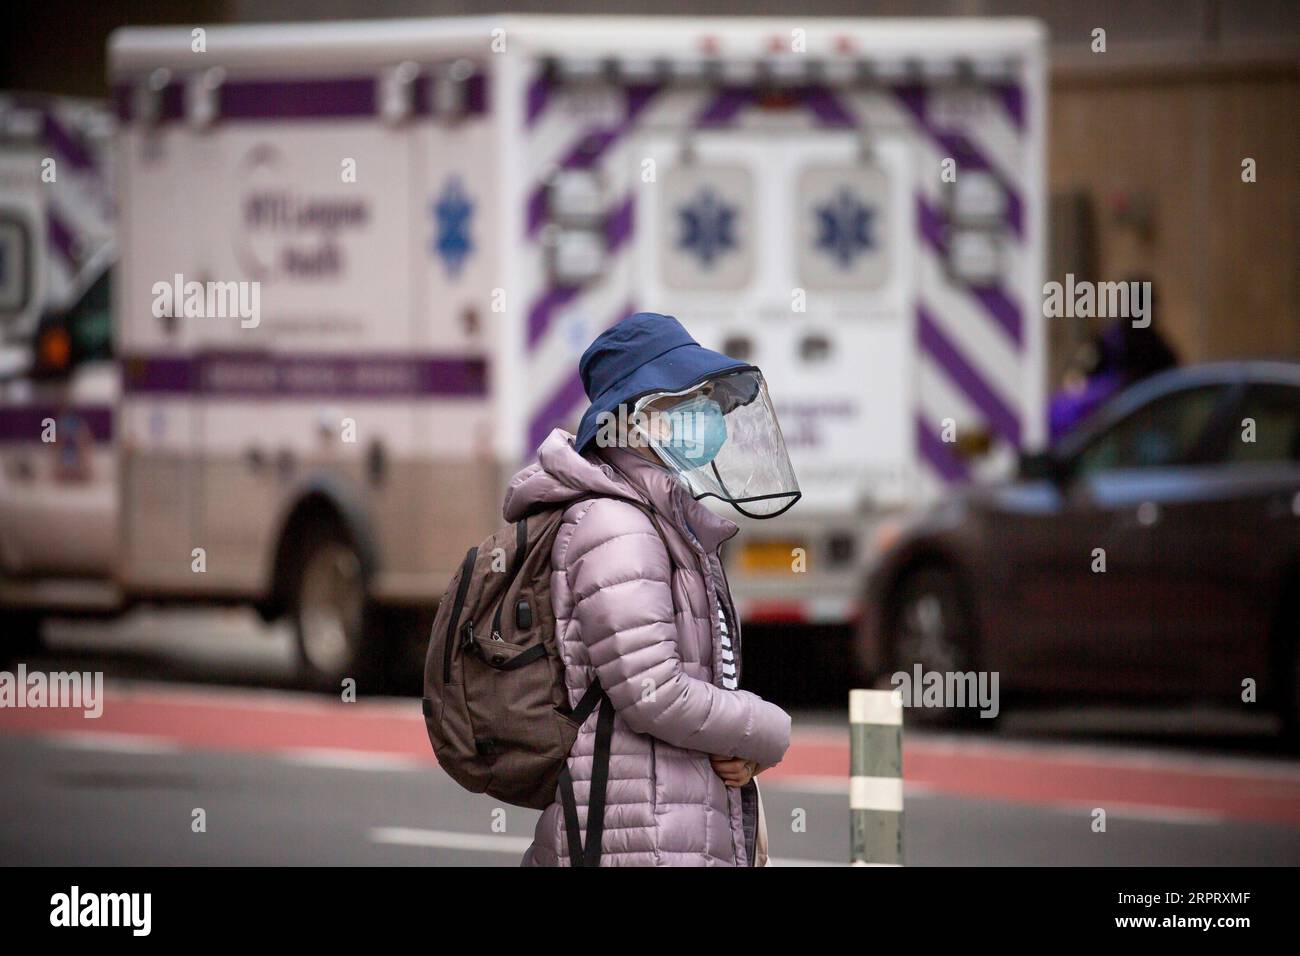 200409 -- NEW YORK, April 9, 2020 Xinhua -- A woman wearing face protection walks near NYU Langone Medical Center during the coronavirus pandemic in New York, the United States, April 8, 2020. The number of COVID-19 cases in the United States reached 401,166 as of 12:20 local time on Wednesday 1620 GMT, according to the Center for Systems Science and Engineering CSSE at Johns Hopkins University. A total of 12,936 deaths were reported in the nation, according to the CSSE. Photo by Michael Nagle/Xinhua U.S.-NEW YORK-COVID-19 PUBLICATIONxNOTxINxCHN Stock Photo